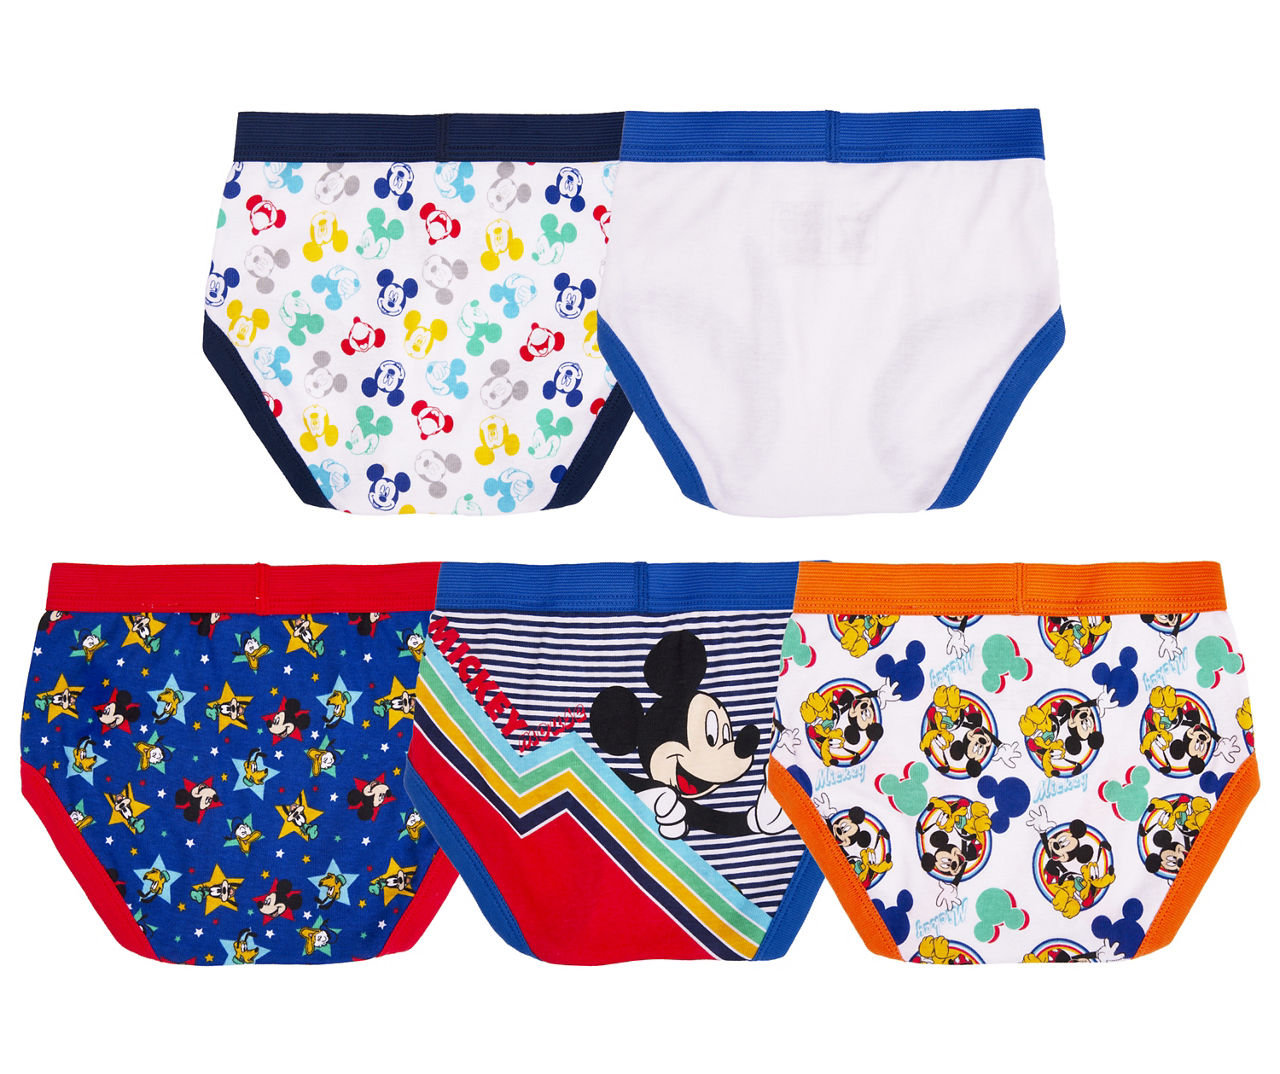 Toddler Size 4T White, Blue & Orange Briefs With Coloring Page, 5